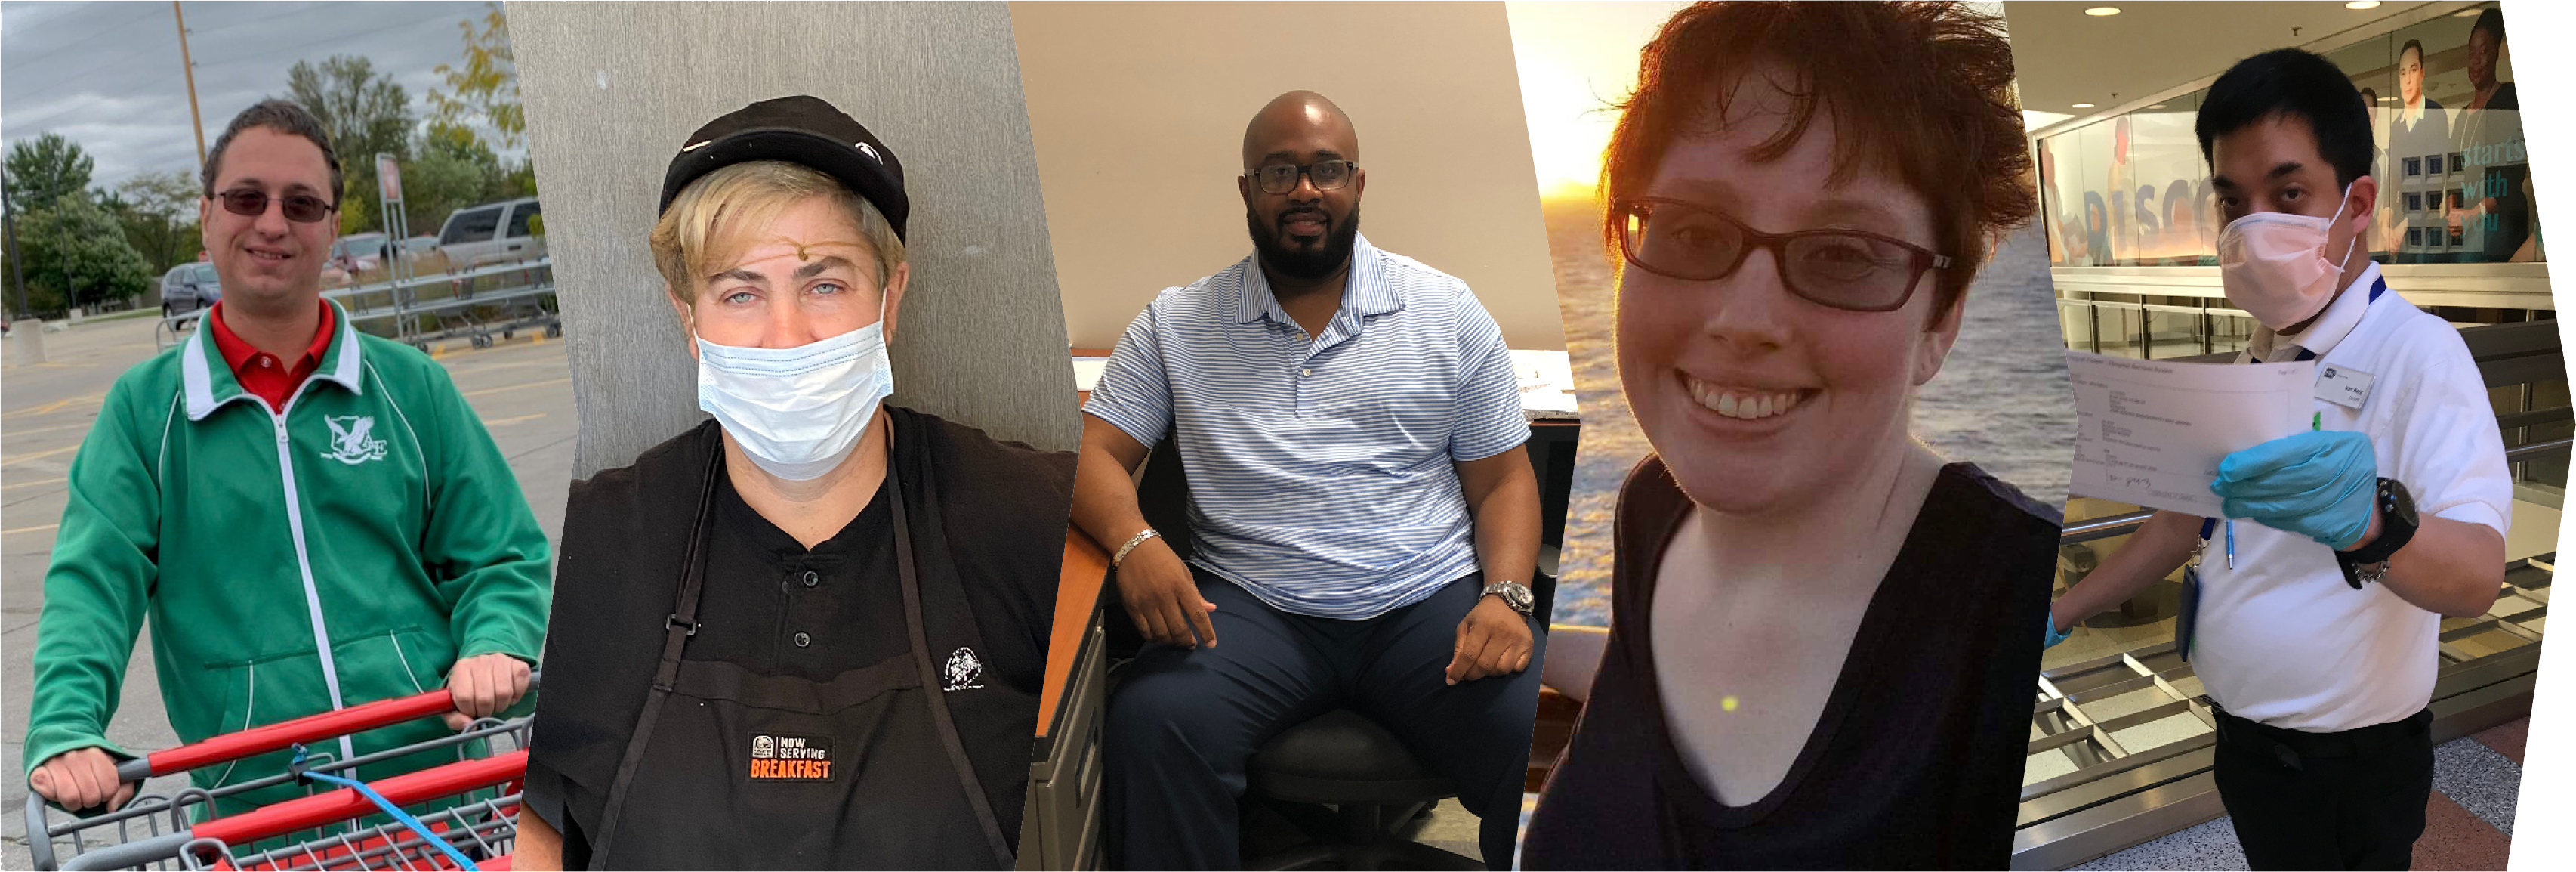 5 APSE members in a photo. Left to right. White man outside with a cart in a parking lot. White woman with a mask, in a black Taco Bell uniform. A Black man in a blue shirt smiling, sitting at a desk. A sunset, woman smiling at the camera. A hospital employee wearing a mask and gloves, holding a paycheck out.